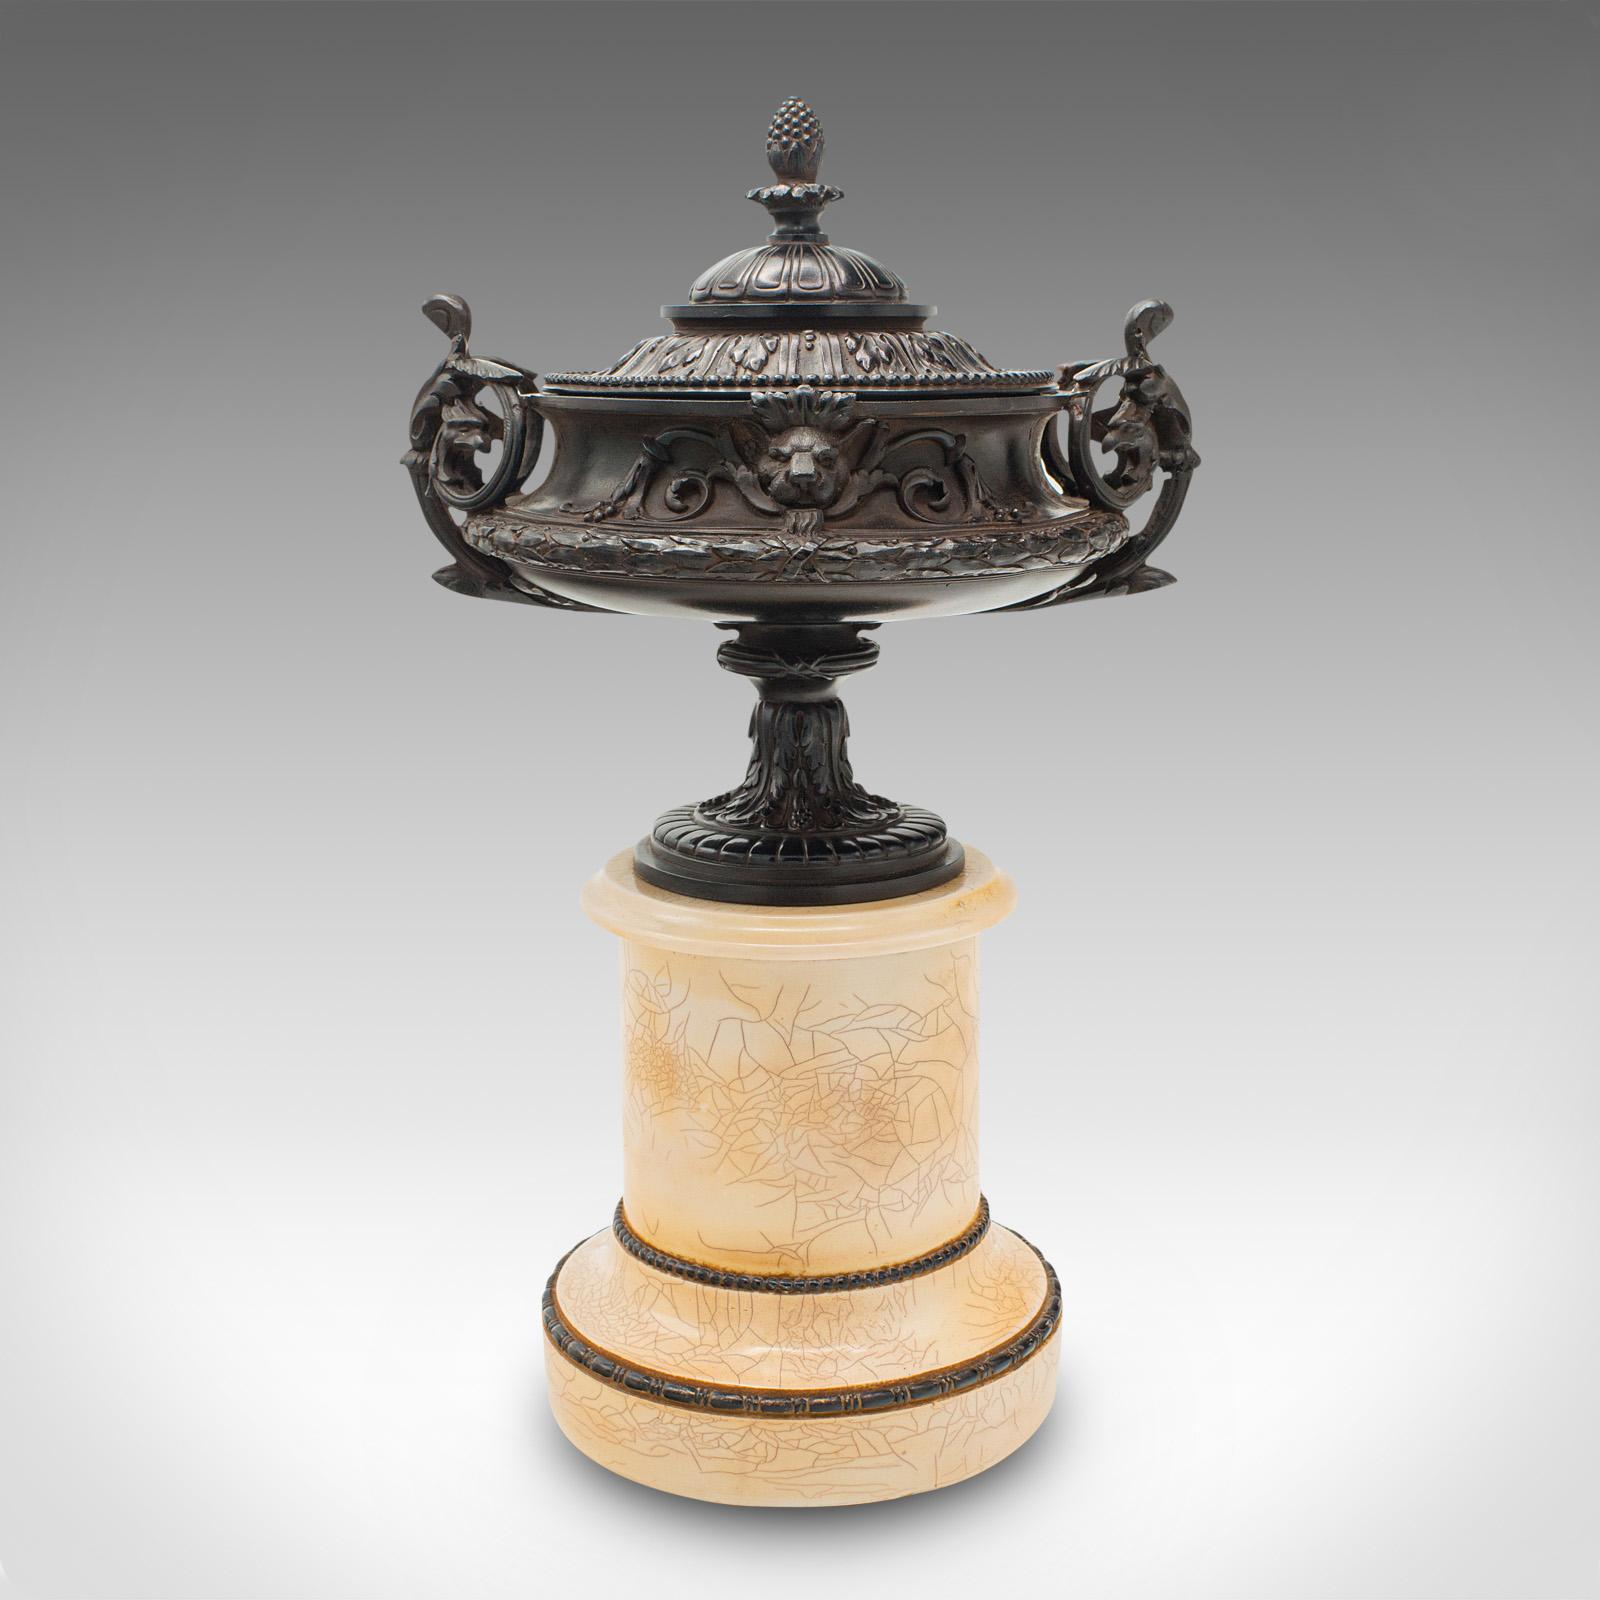 This is a vintage neo-classical urn. A Continental, Bakelite decorative ornament in Grand Tour taste, dating to the early 20th century, circa 1930.

Striking forms, with serpentine flourishes throughout
Displaying. desirable aged patina and in good